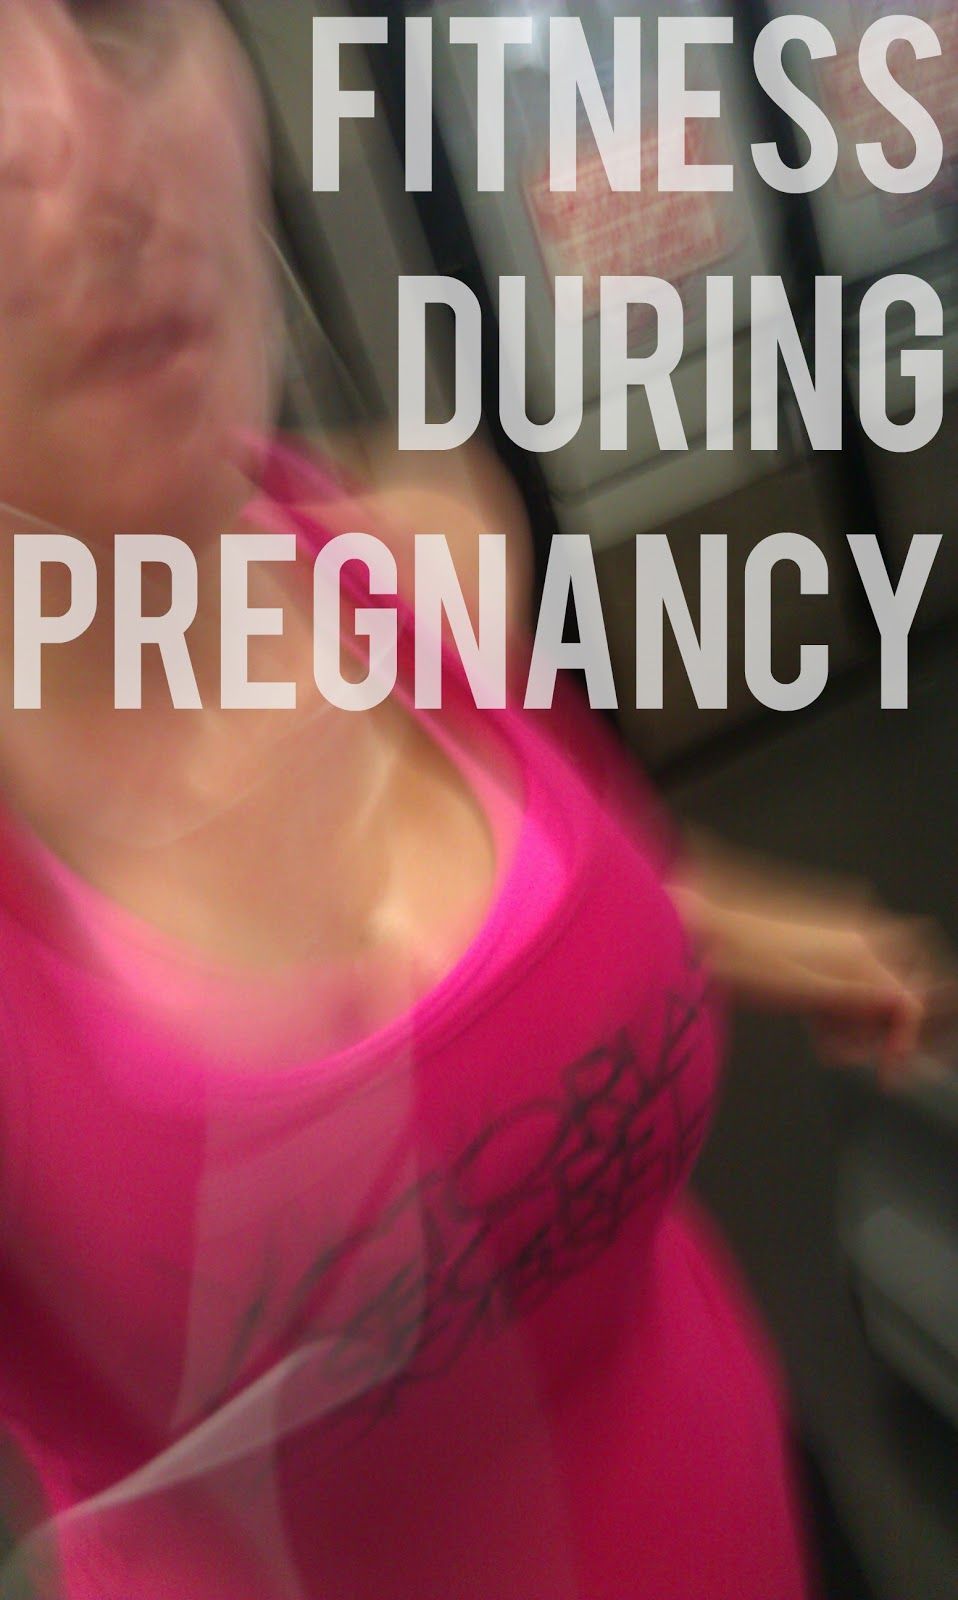 Great blog on pregnancy health. Only gained 27lbs with first one – if theres a s